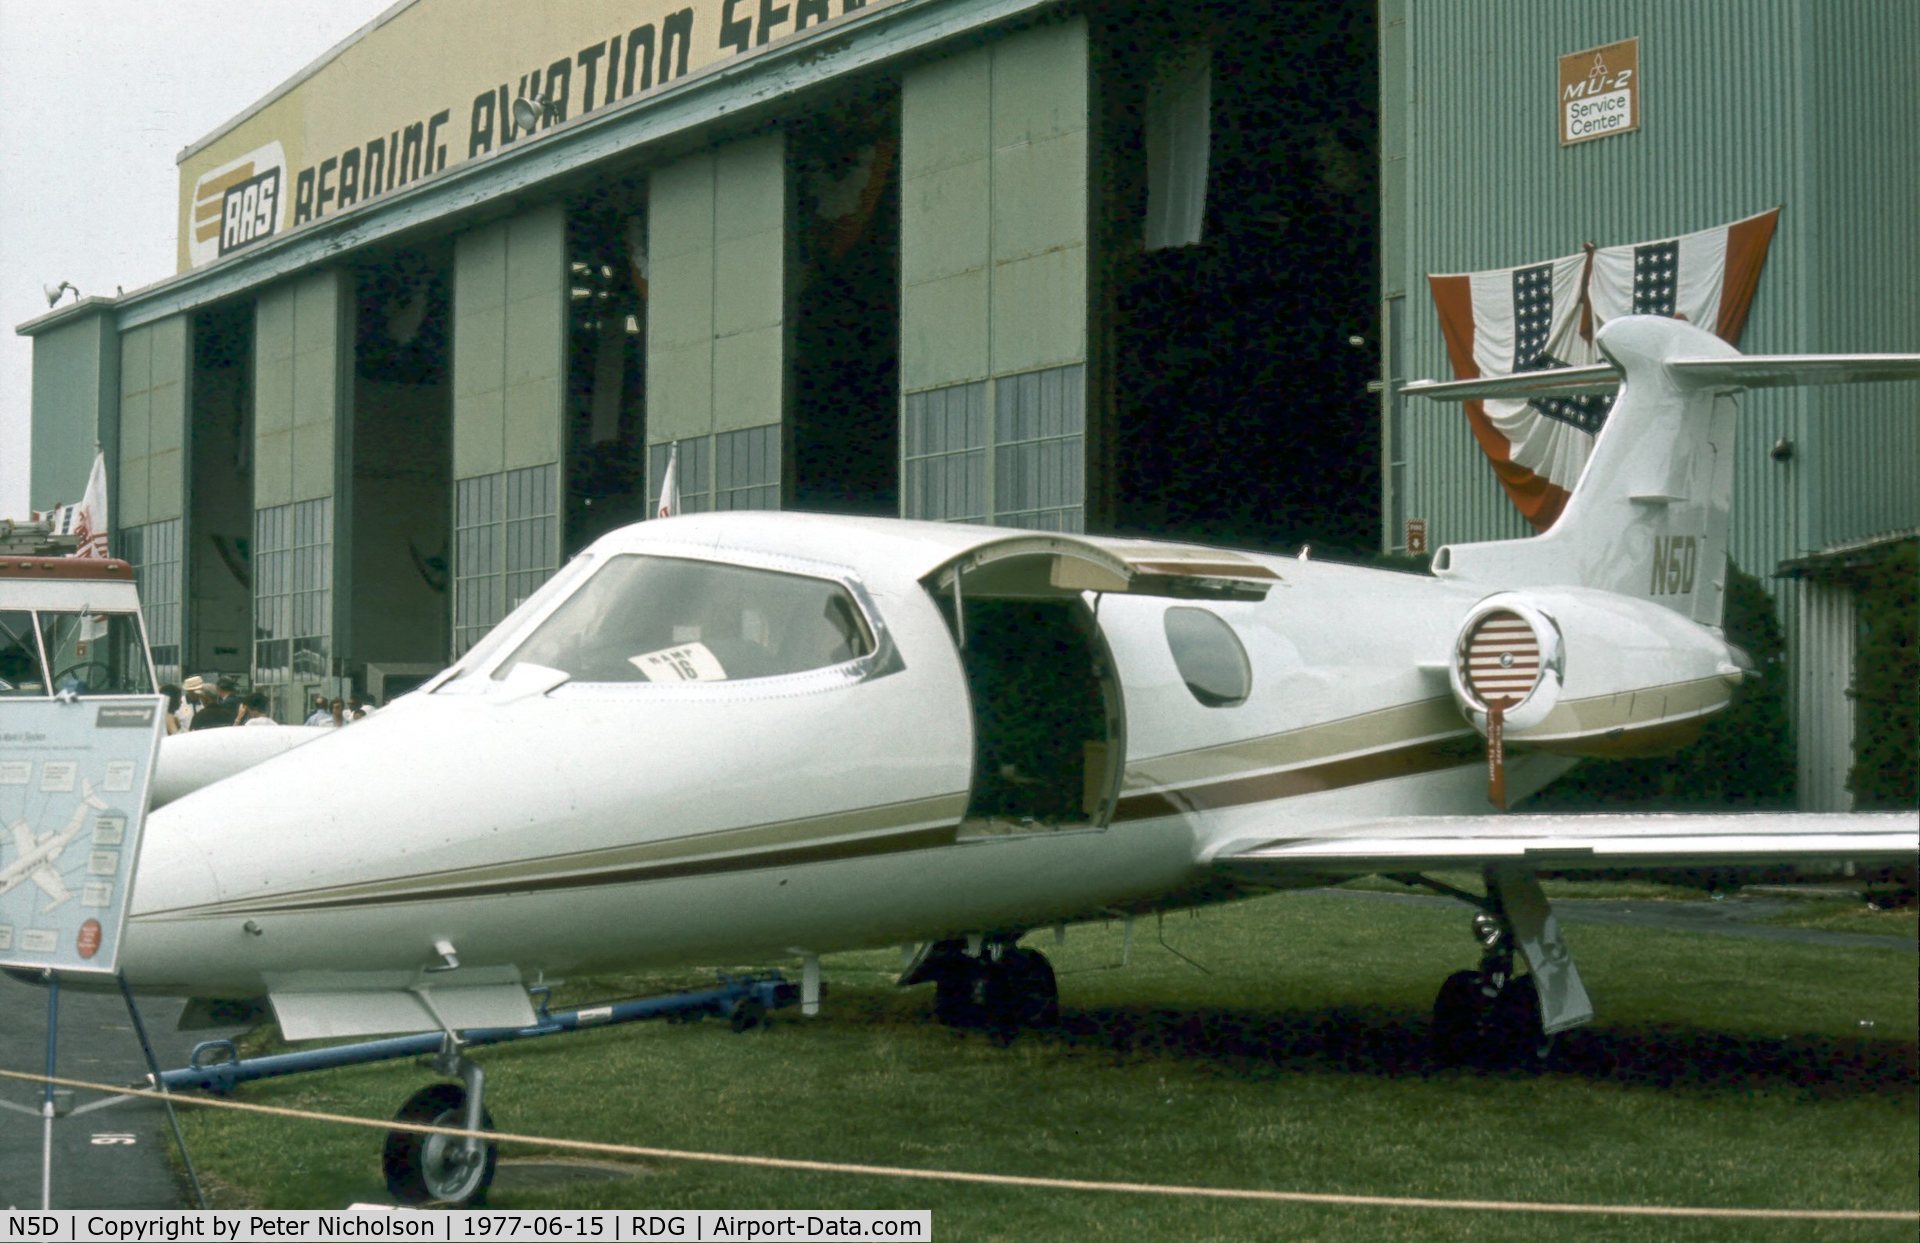 N5D, 1966 Learjet 23 C/N 23-095, This Learjet was present at the 1977 Reading Airshow.